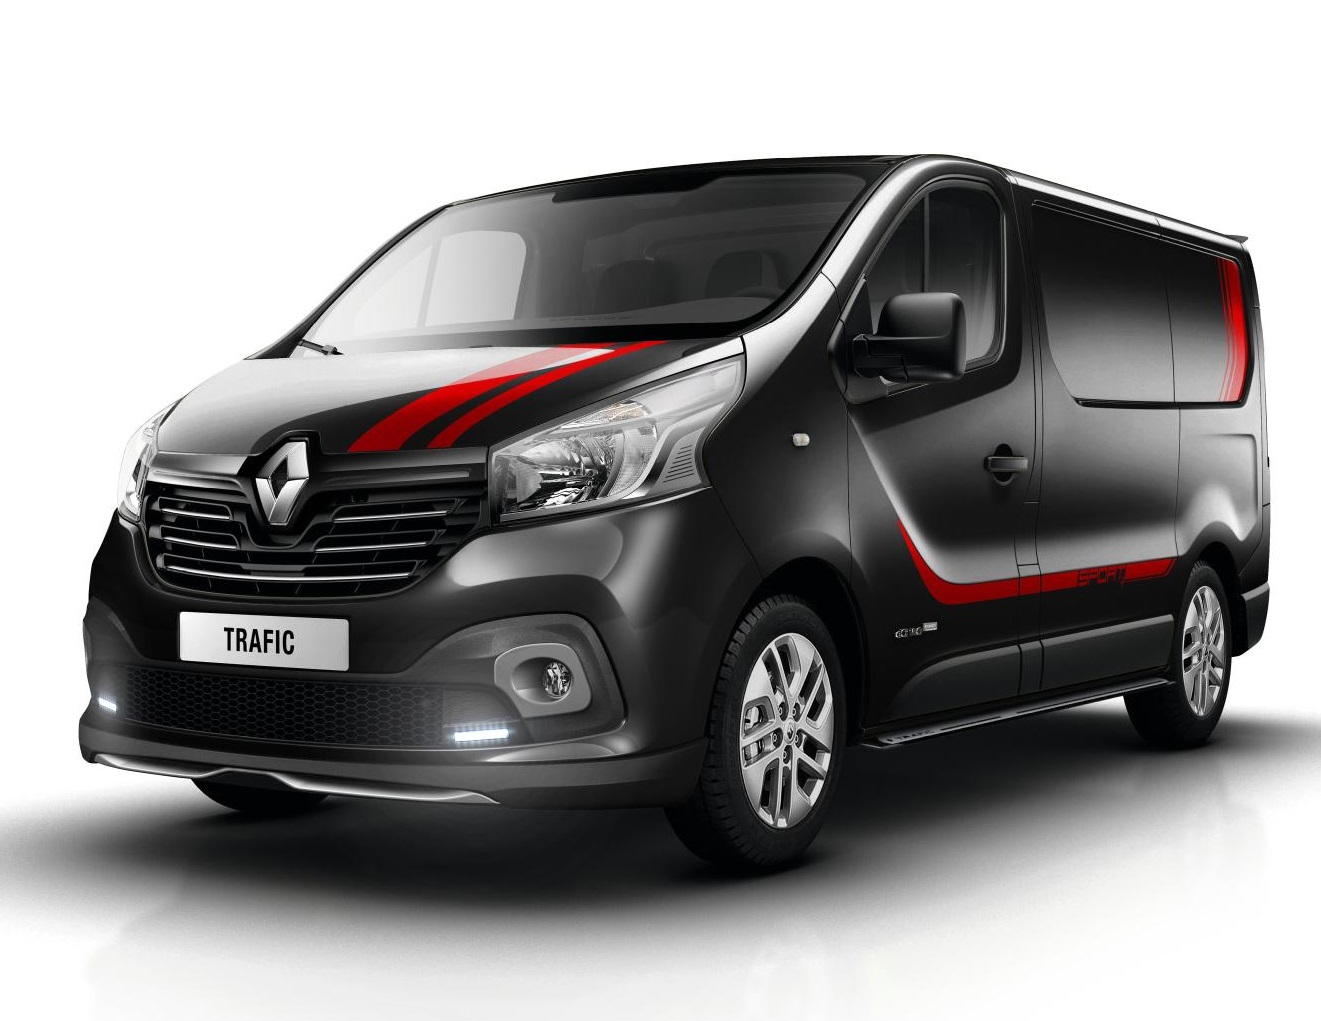 New Trafic Sport added to Renault family